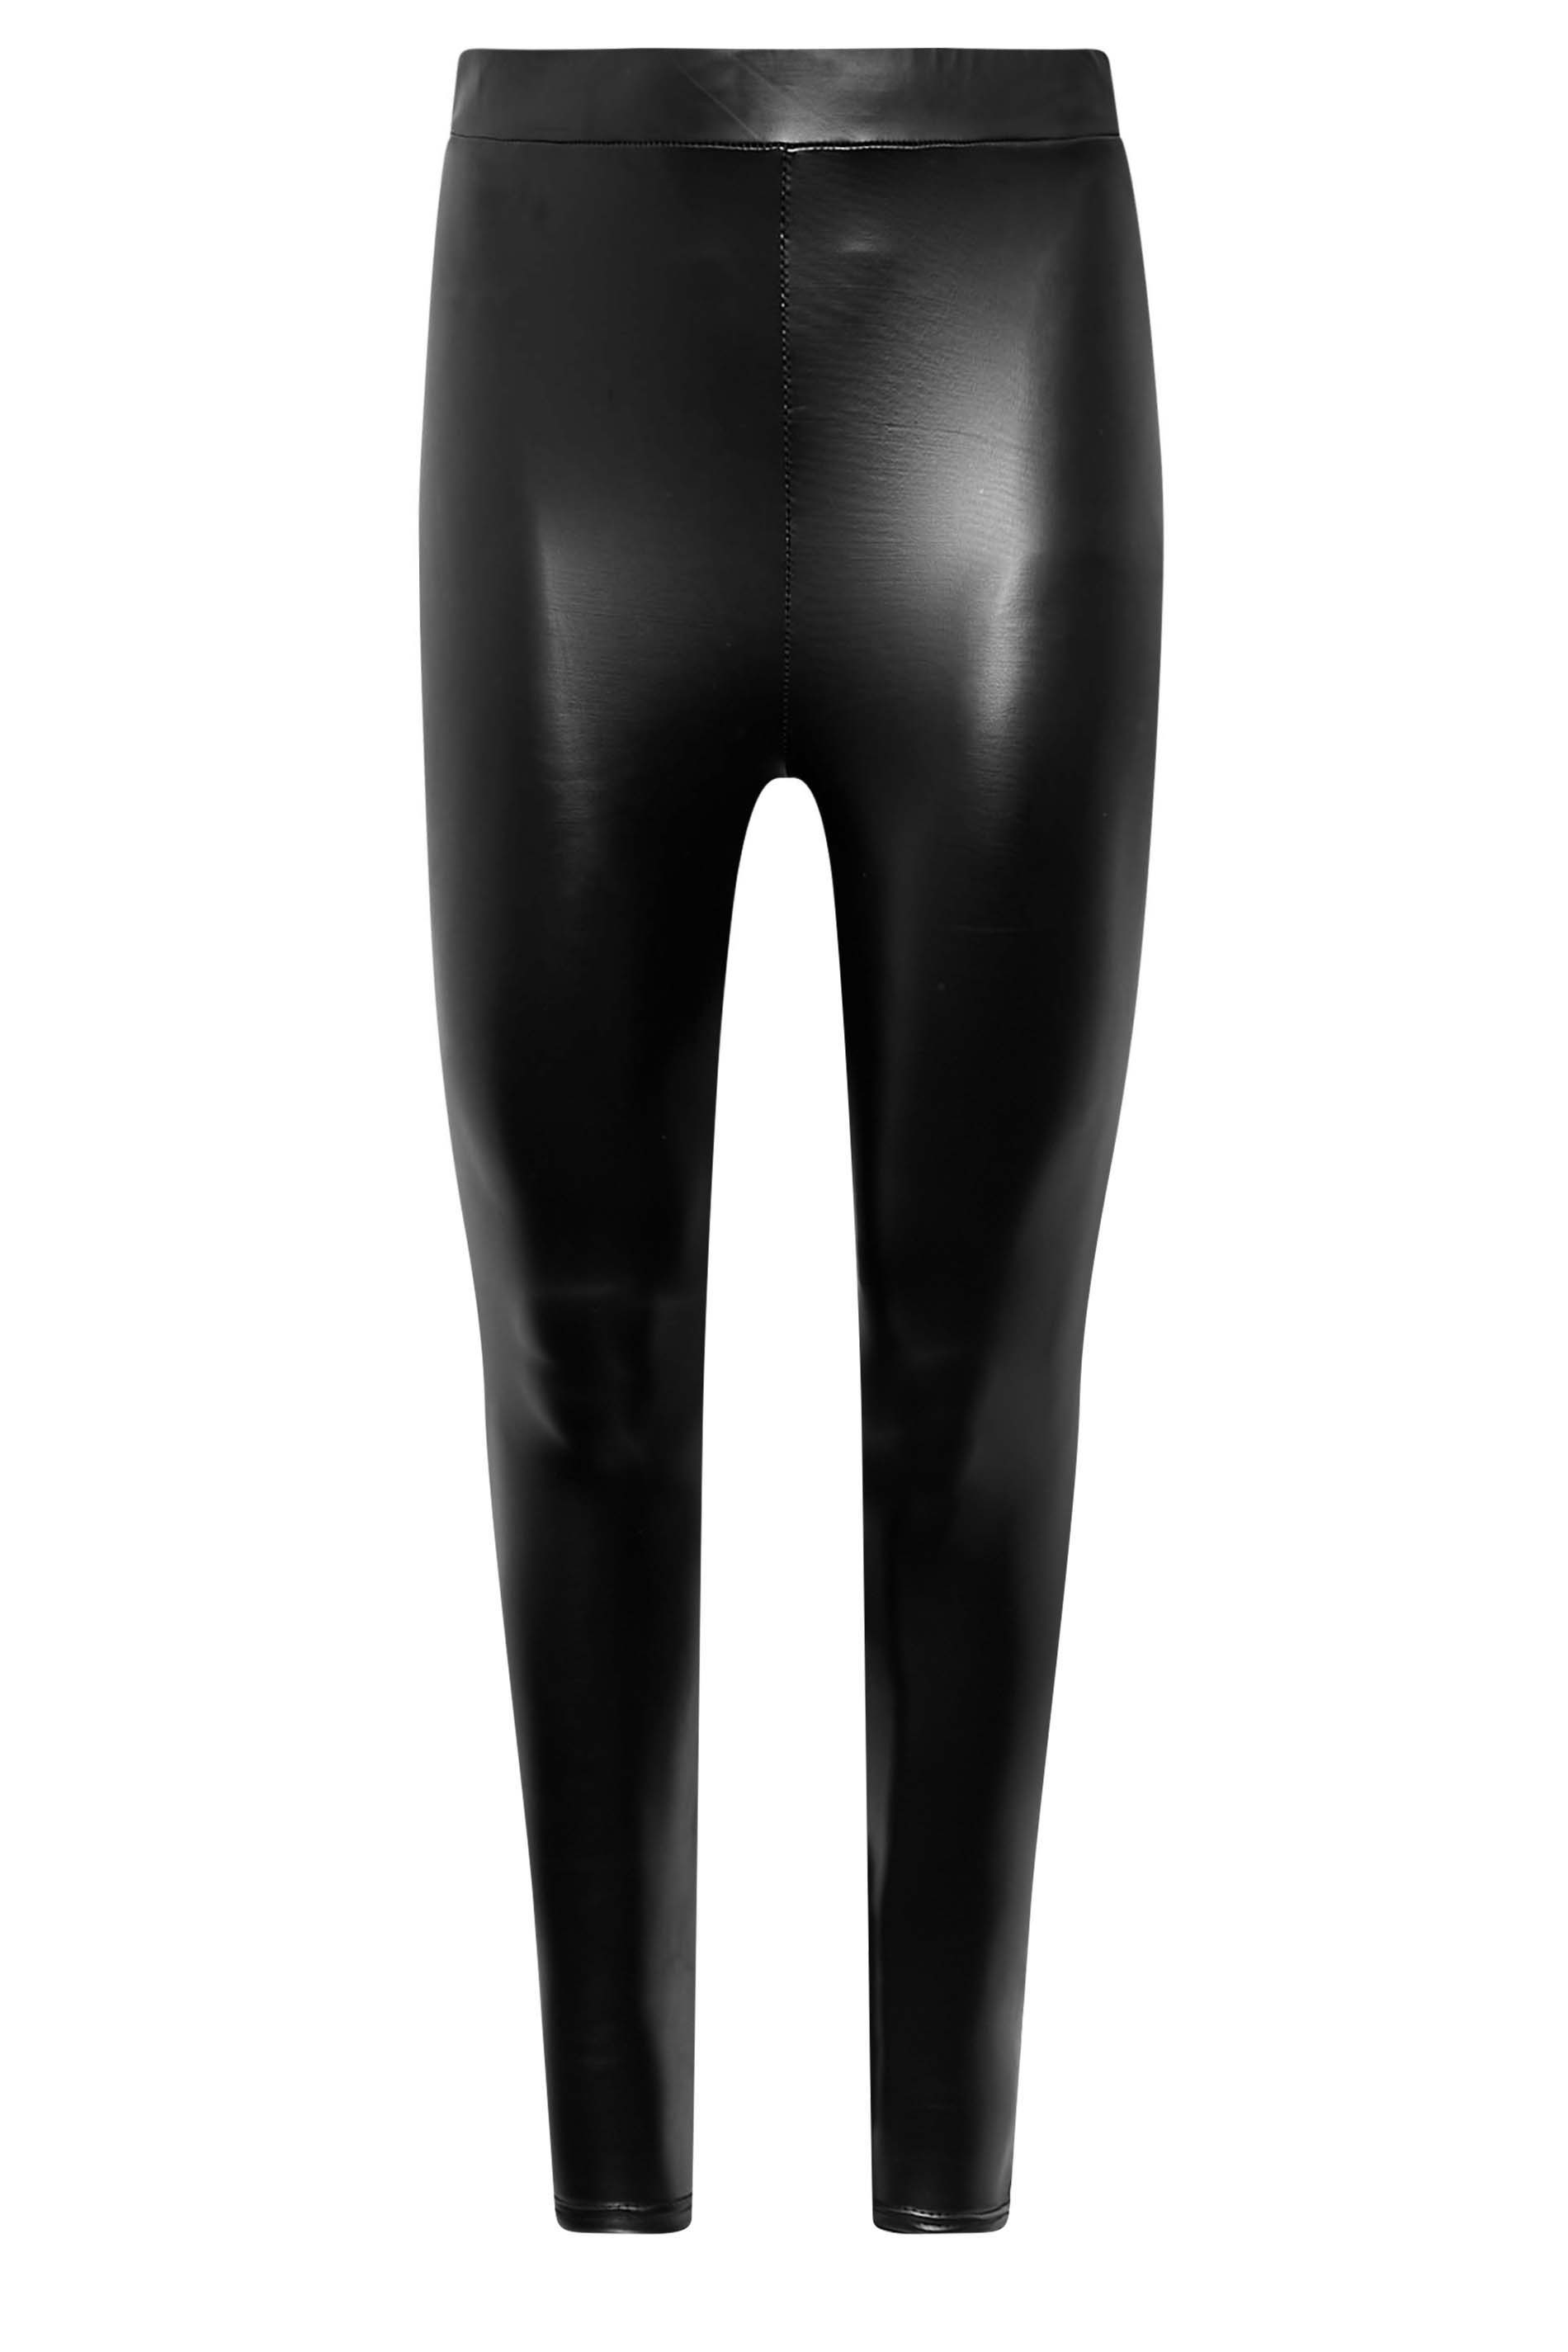 YOURS PETITE Plus Size Black Stretch Leather Look Leggings | Yours Clothing